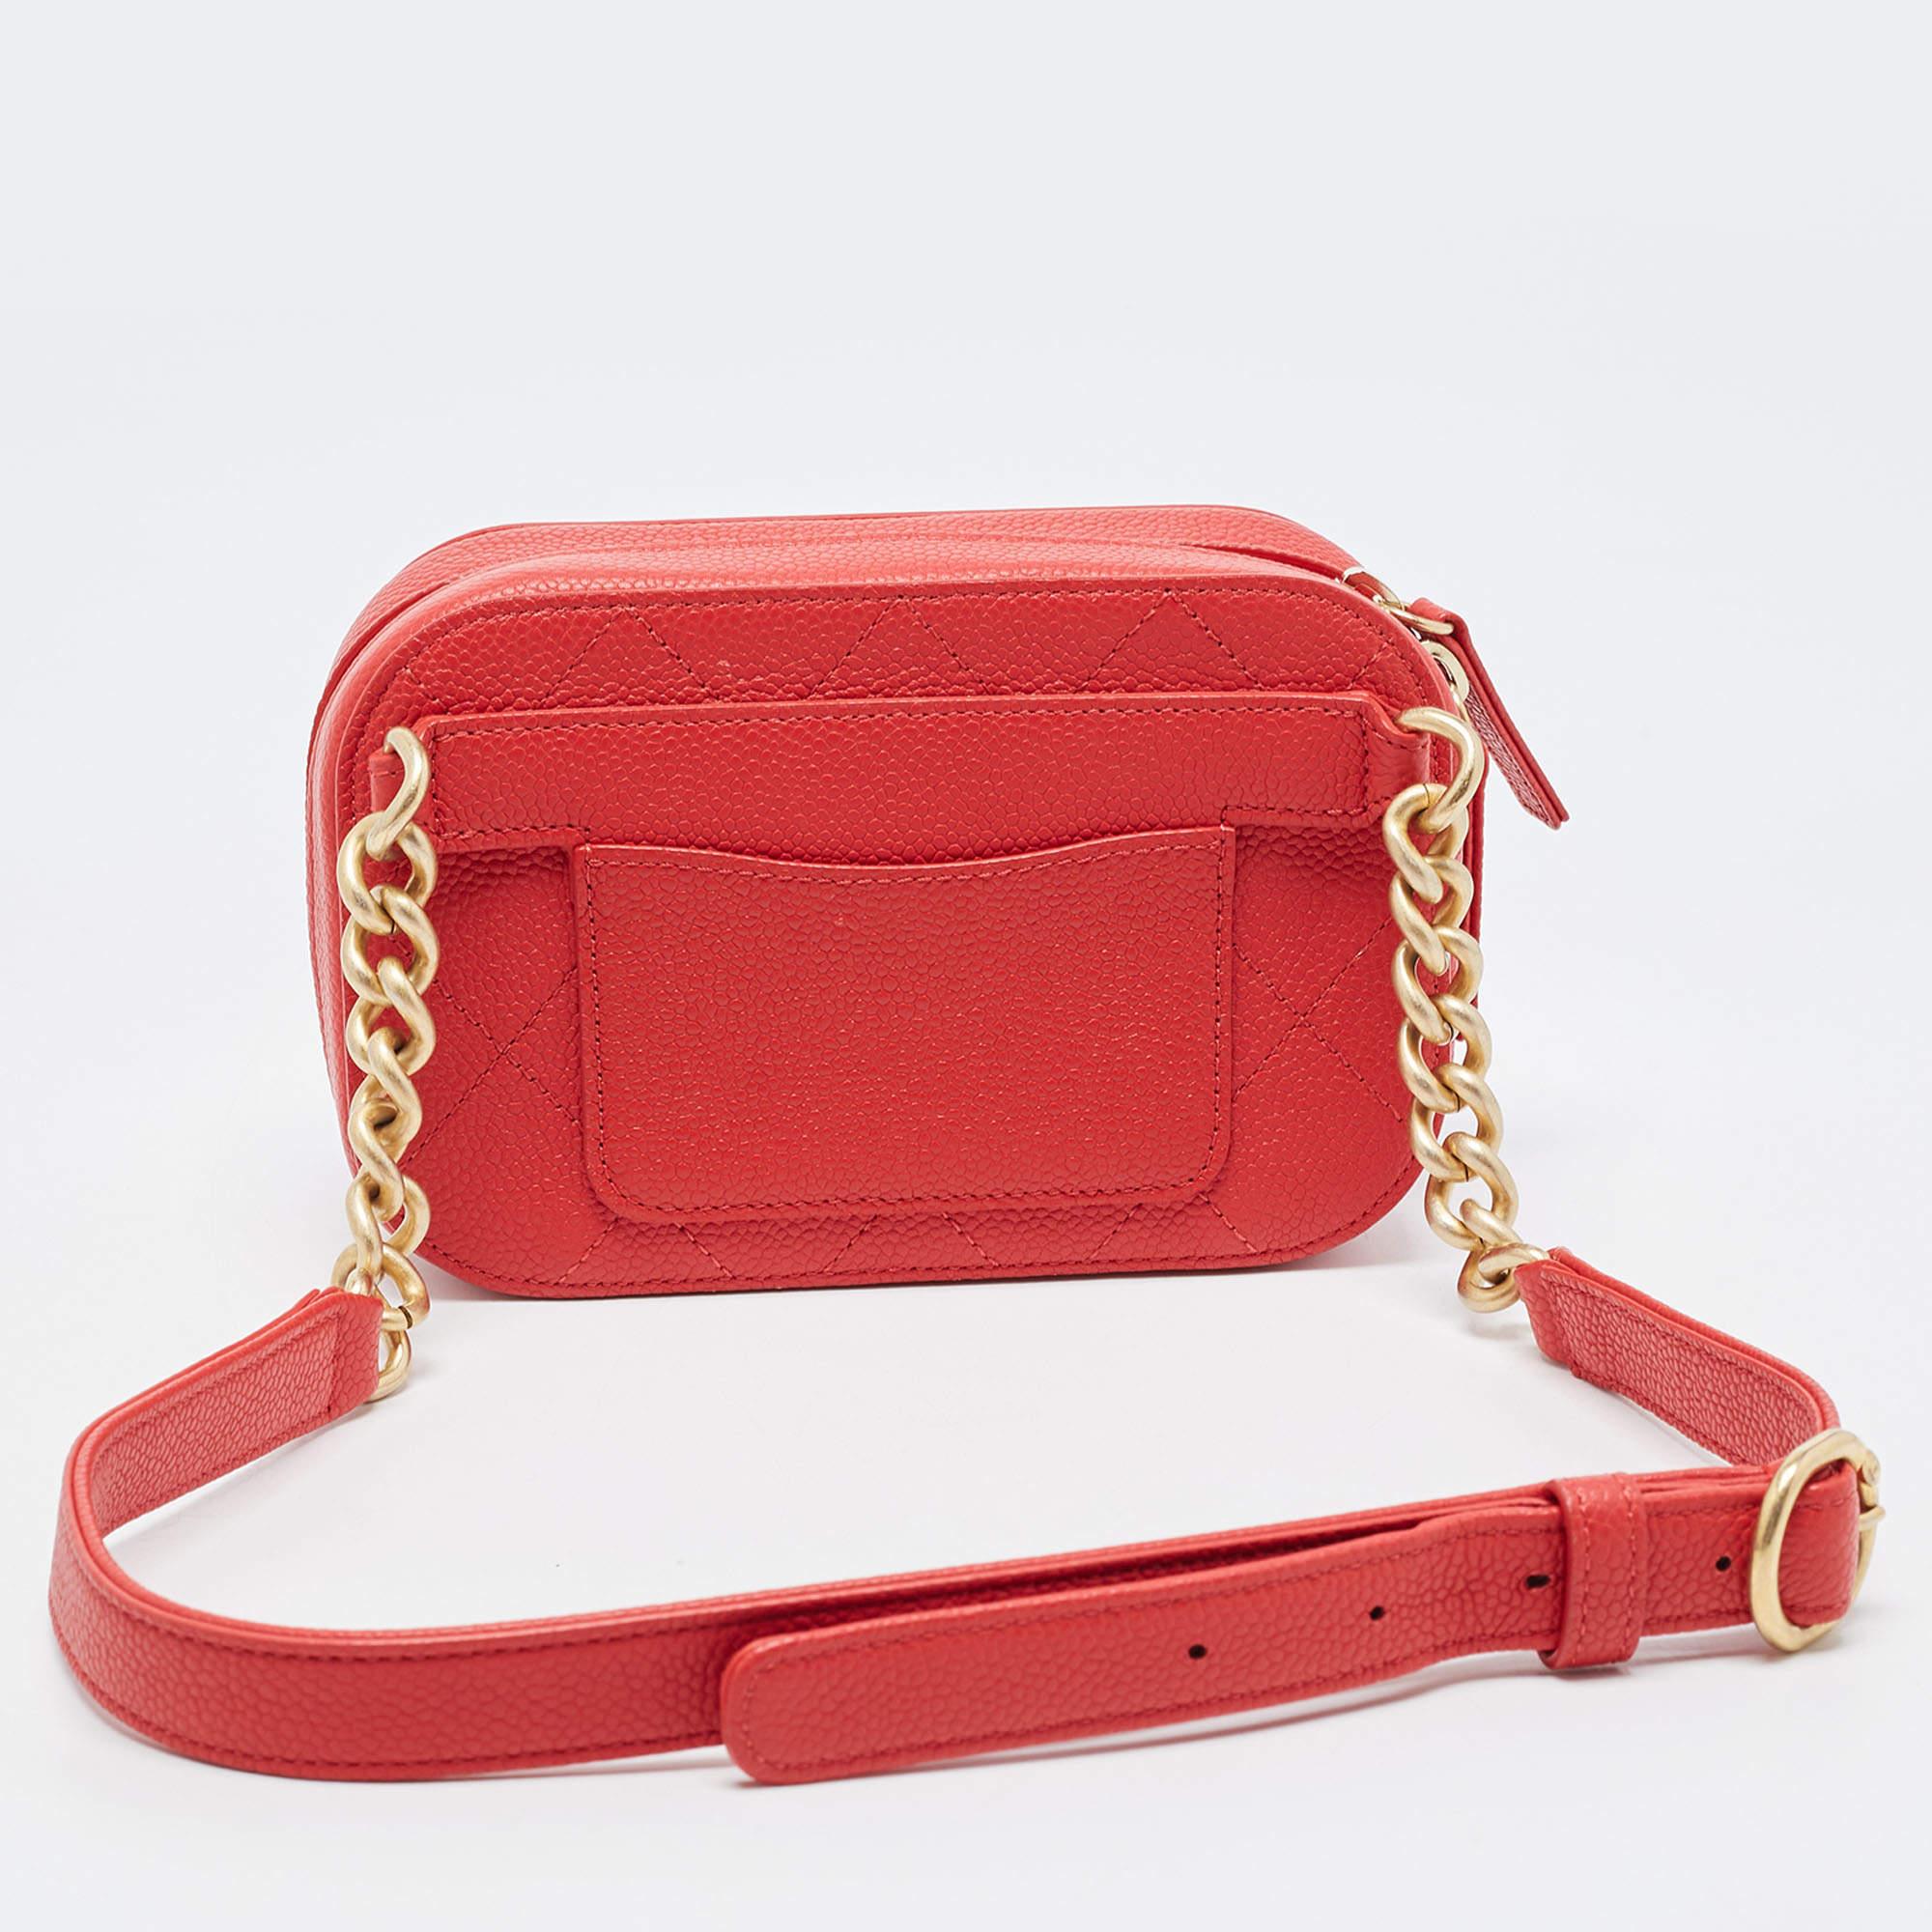 The Chanel Chic Affinity belt bag is a stylish and luxurious accessory. Crafted from high-quality caviar leather, it features an iconic quilted design in vibrant red, a chic belt strap for easy wear, and the classic Chanel logo for an elegant touch.